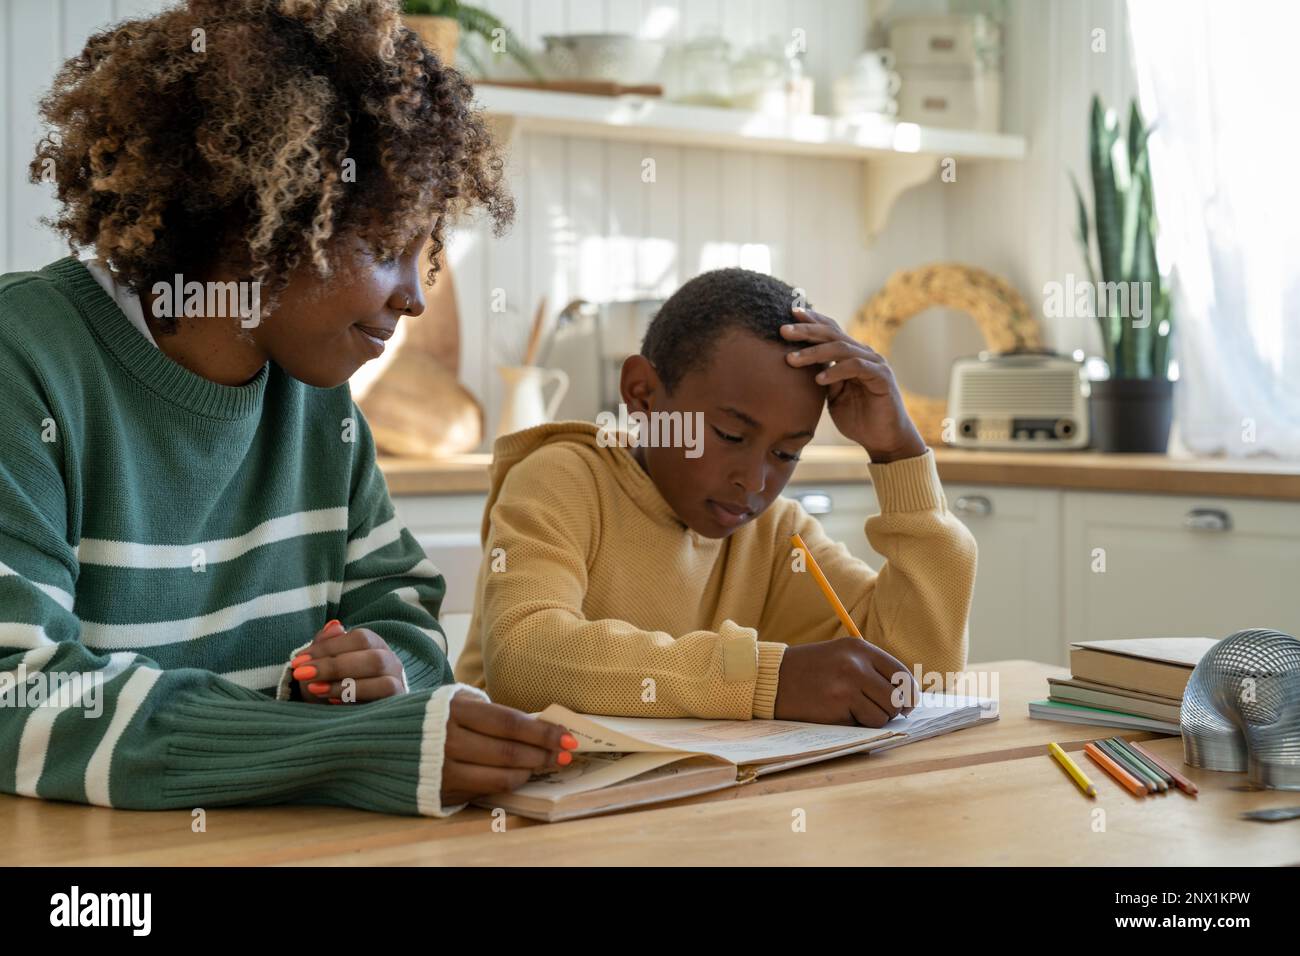 Caring African American mom support pensive schoolboy adopted son with education assignment at home Stock Photo